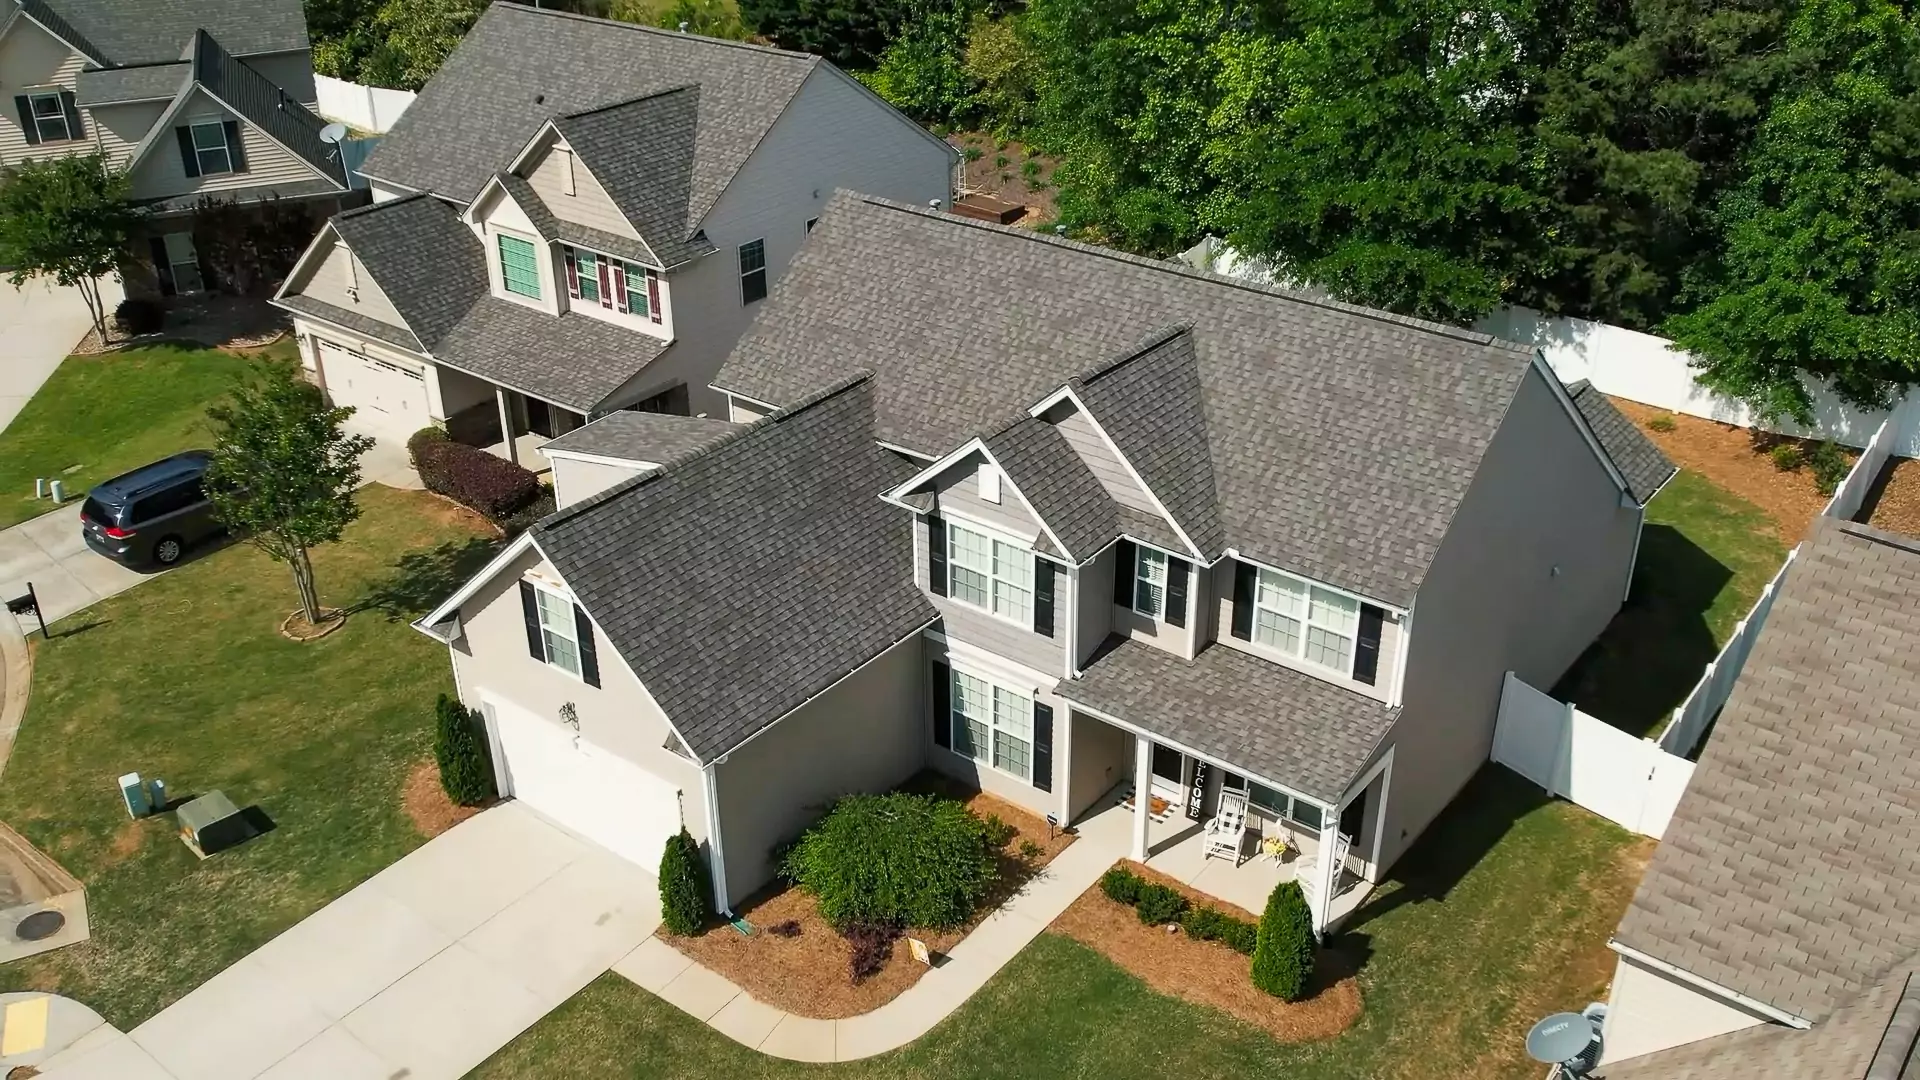 Stunning shingle reroofing outcome by Generation Roofing, reflecting our dedication to quality and affordability in Upstate South Carolina.